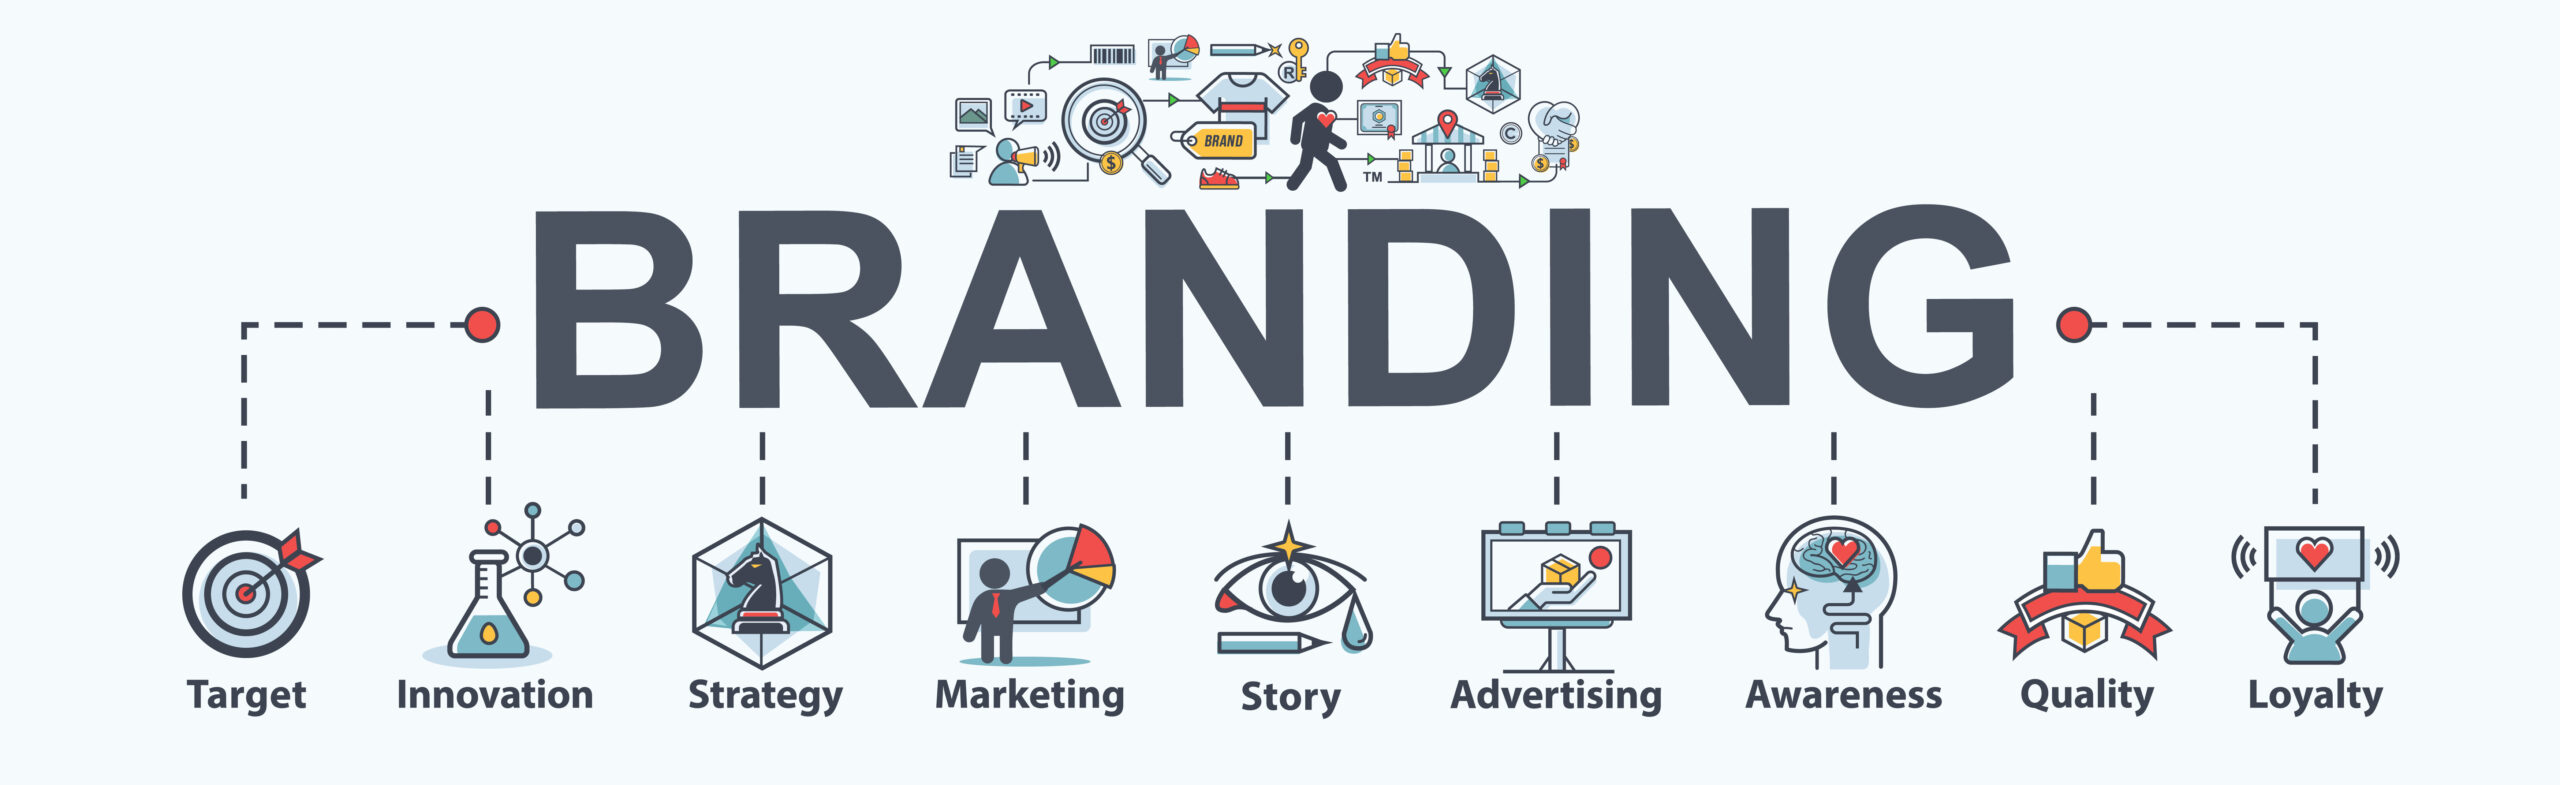 5 Reasons Financial Services Need To Invest In Branding